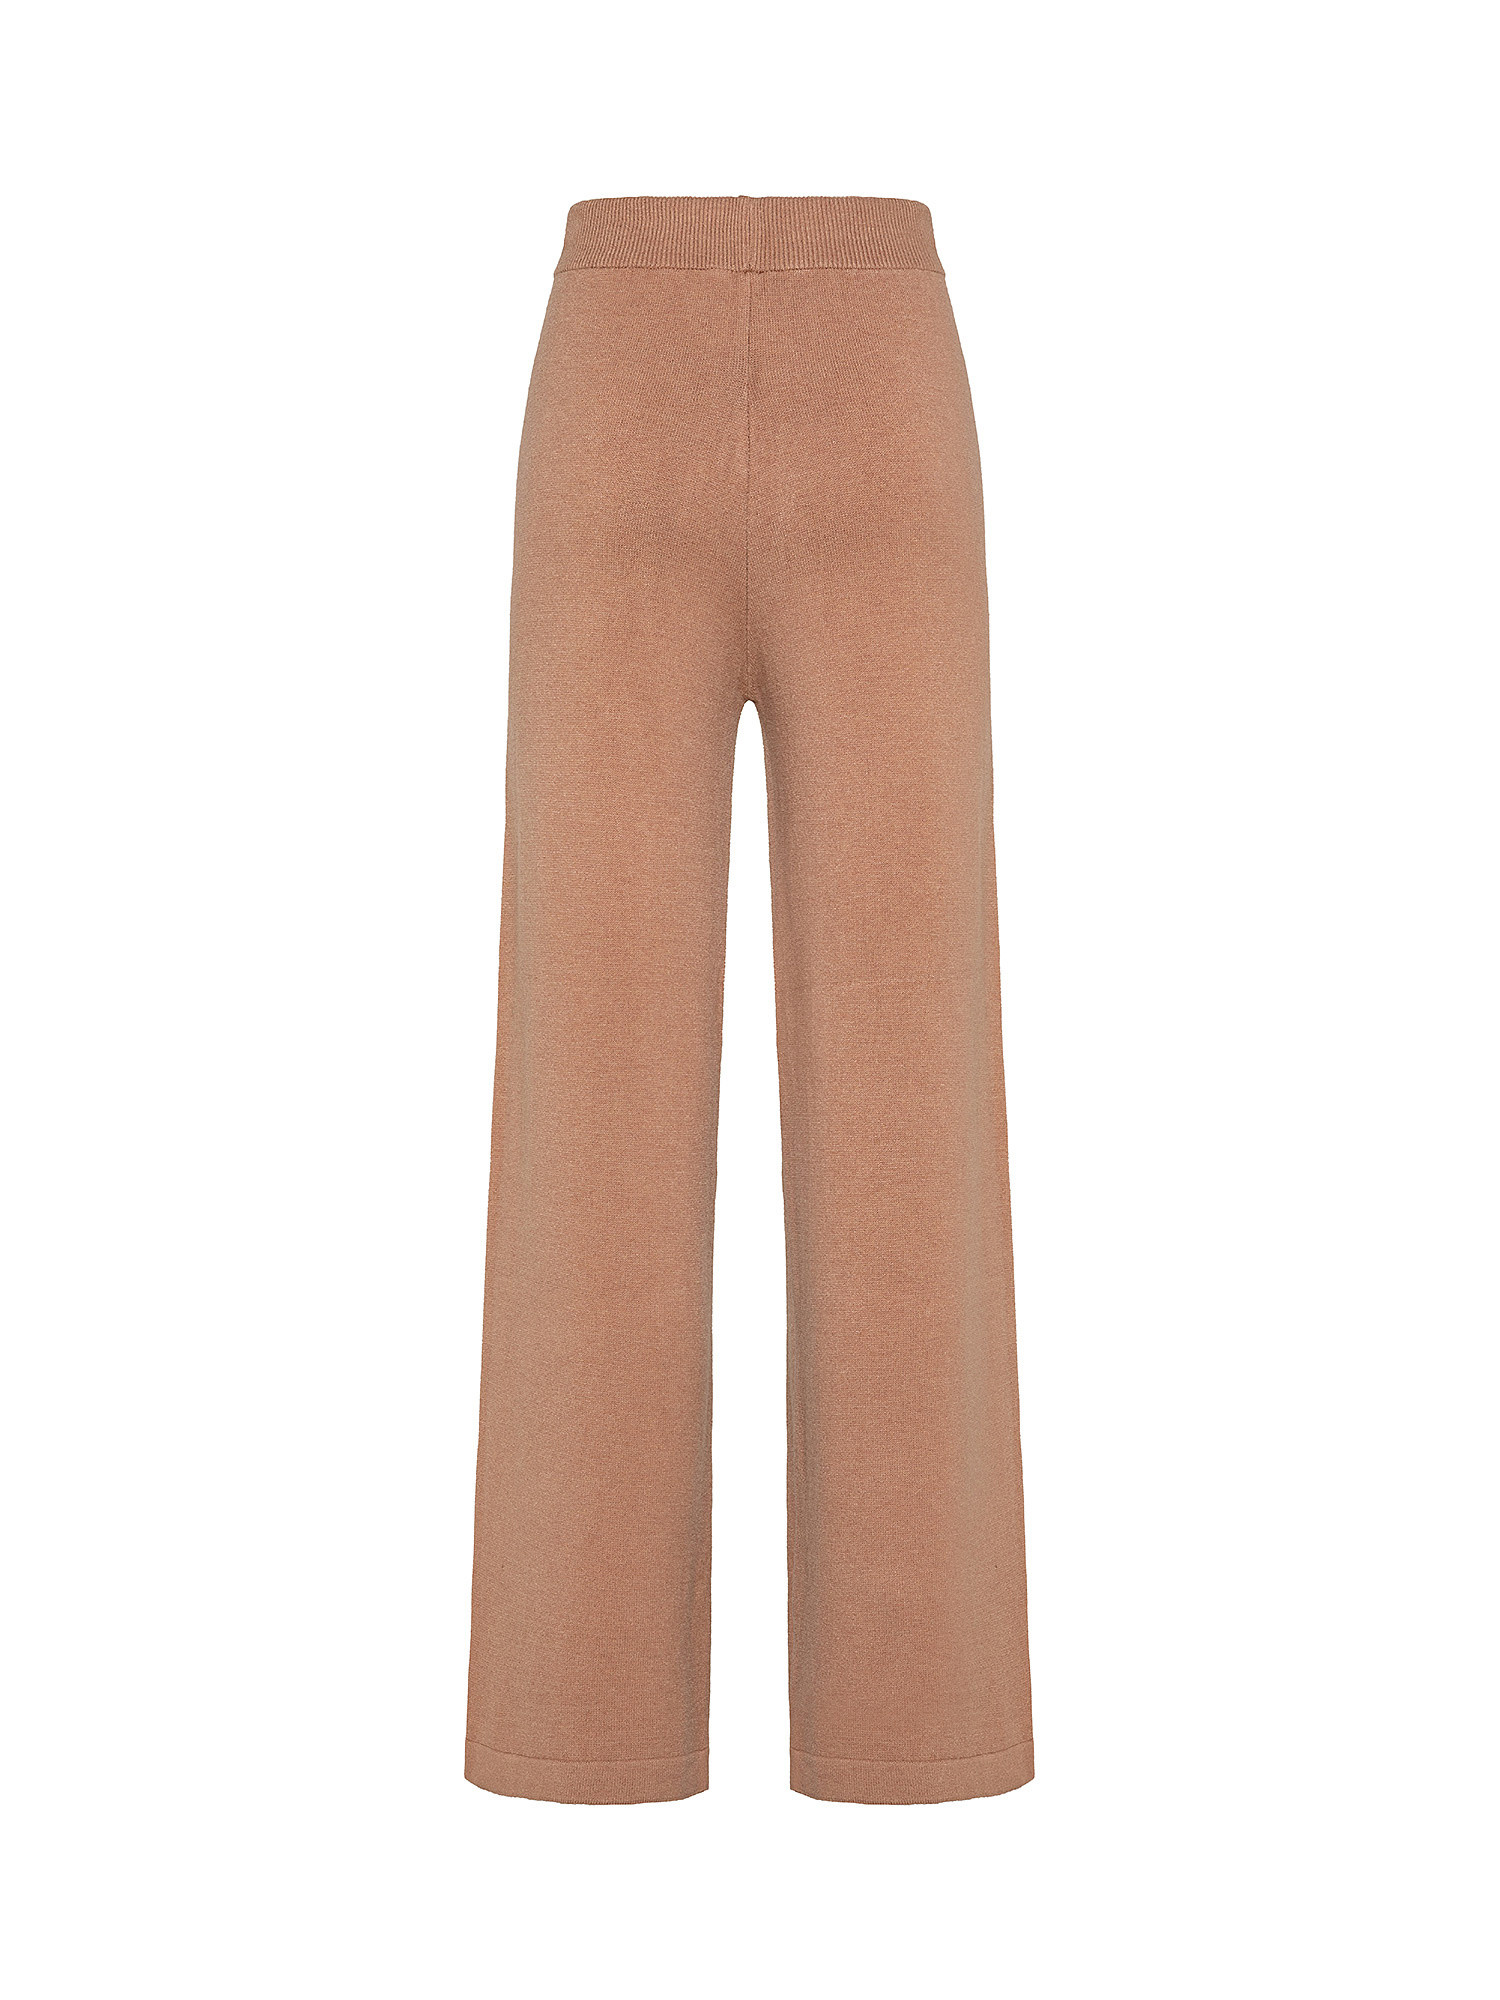 Wide leg knitted trousers, Camel, large image number 1